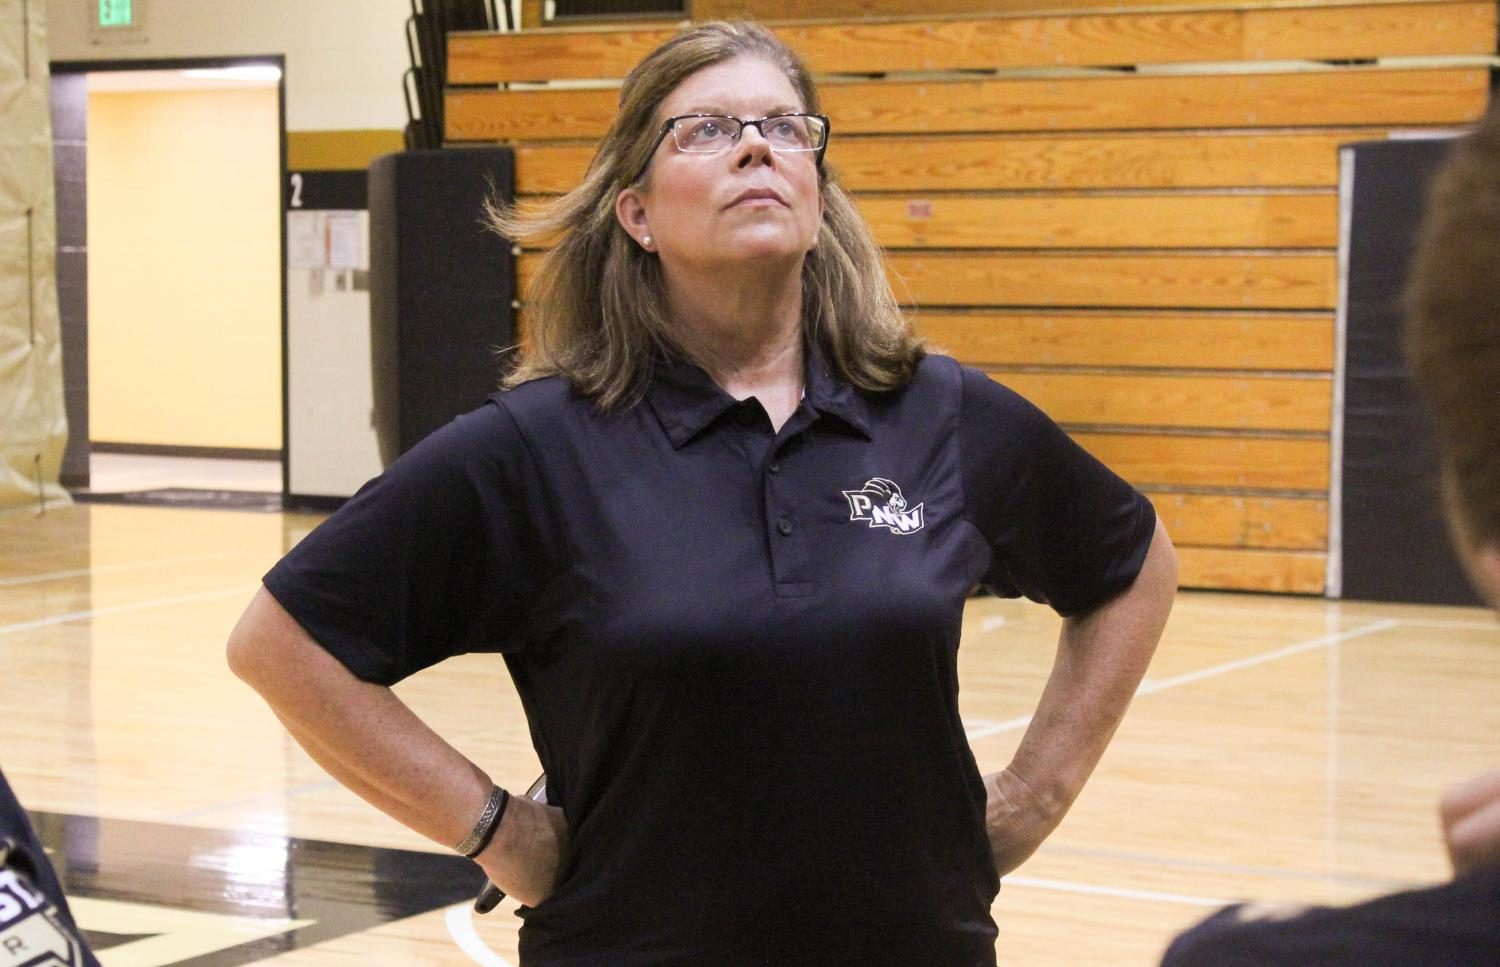 Michelle Searer, cheer coach, watches her team practice for the upcoming season.